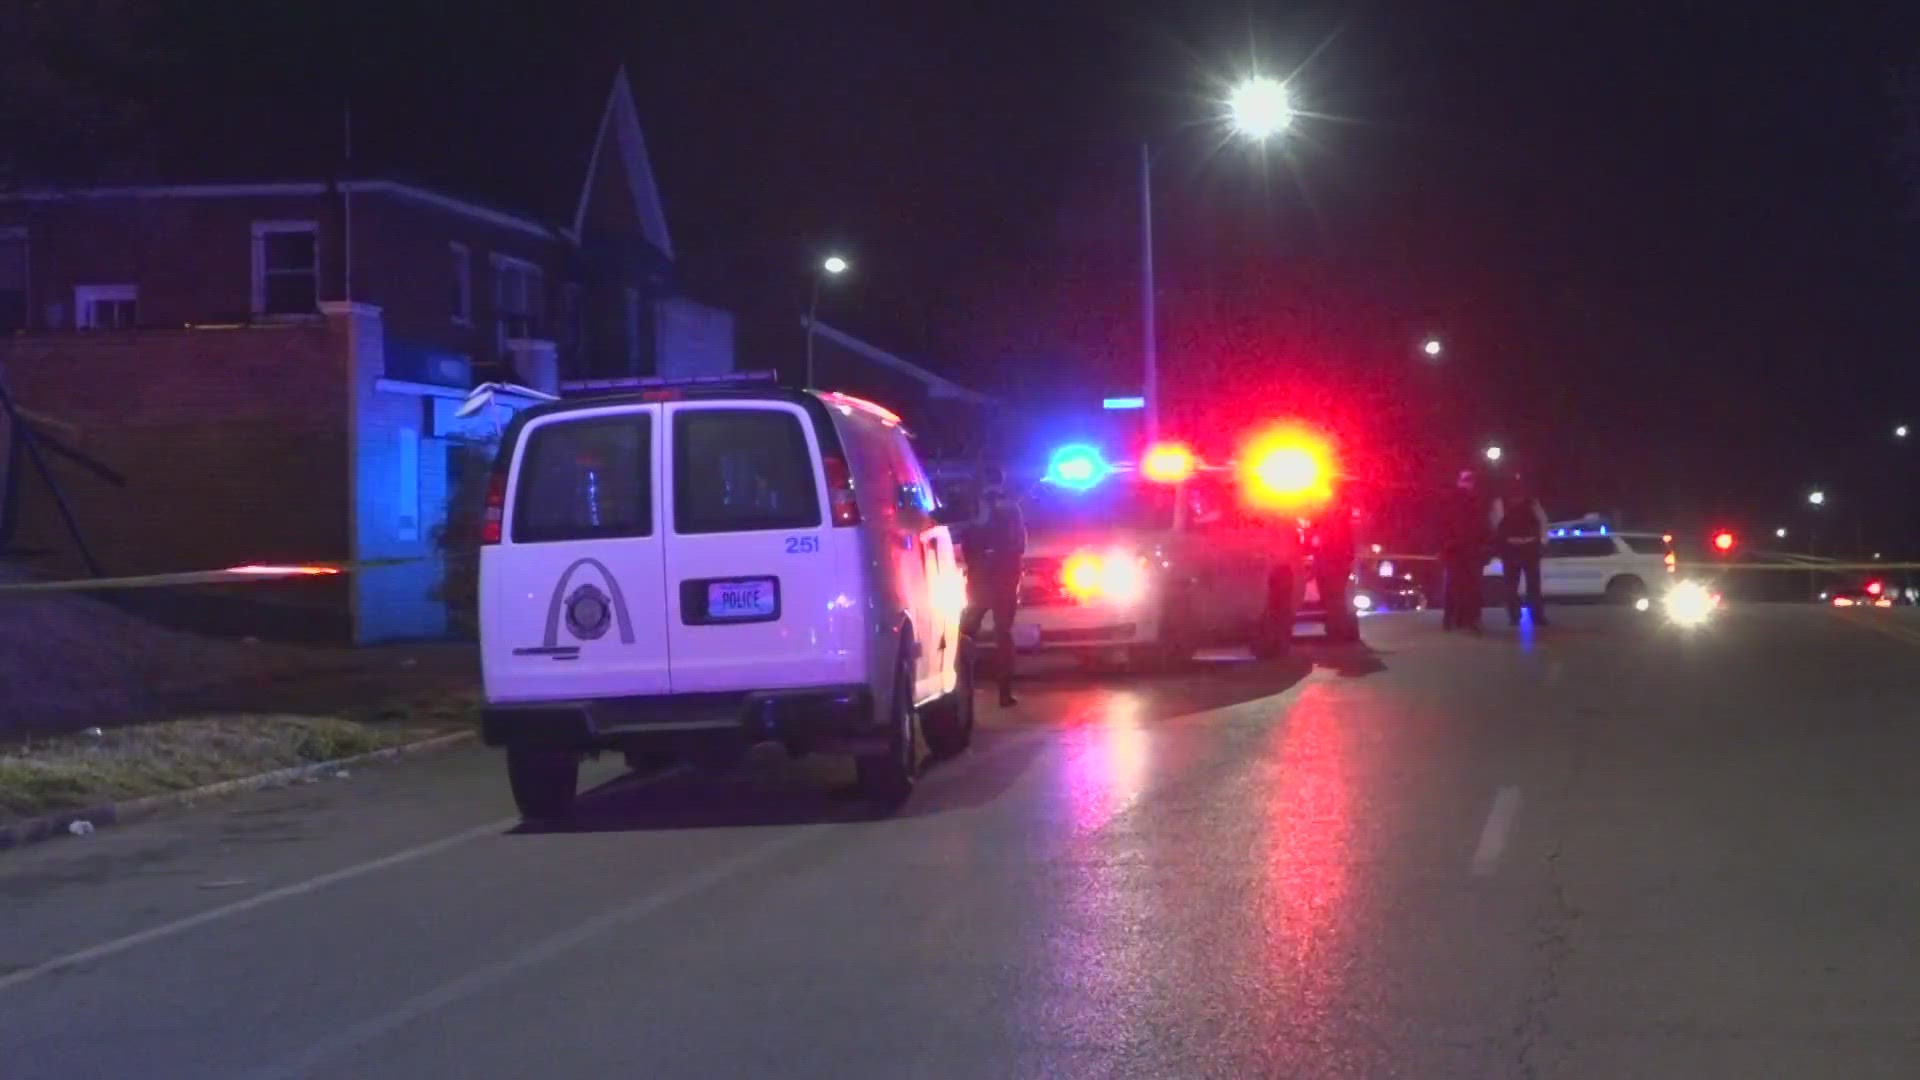 An investigation is underway after a man in his 50s was shot and killed in north St. Louis